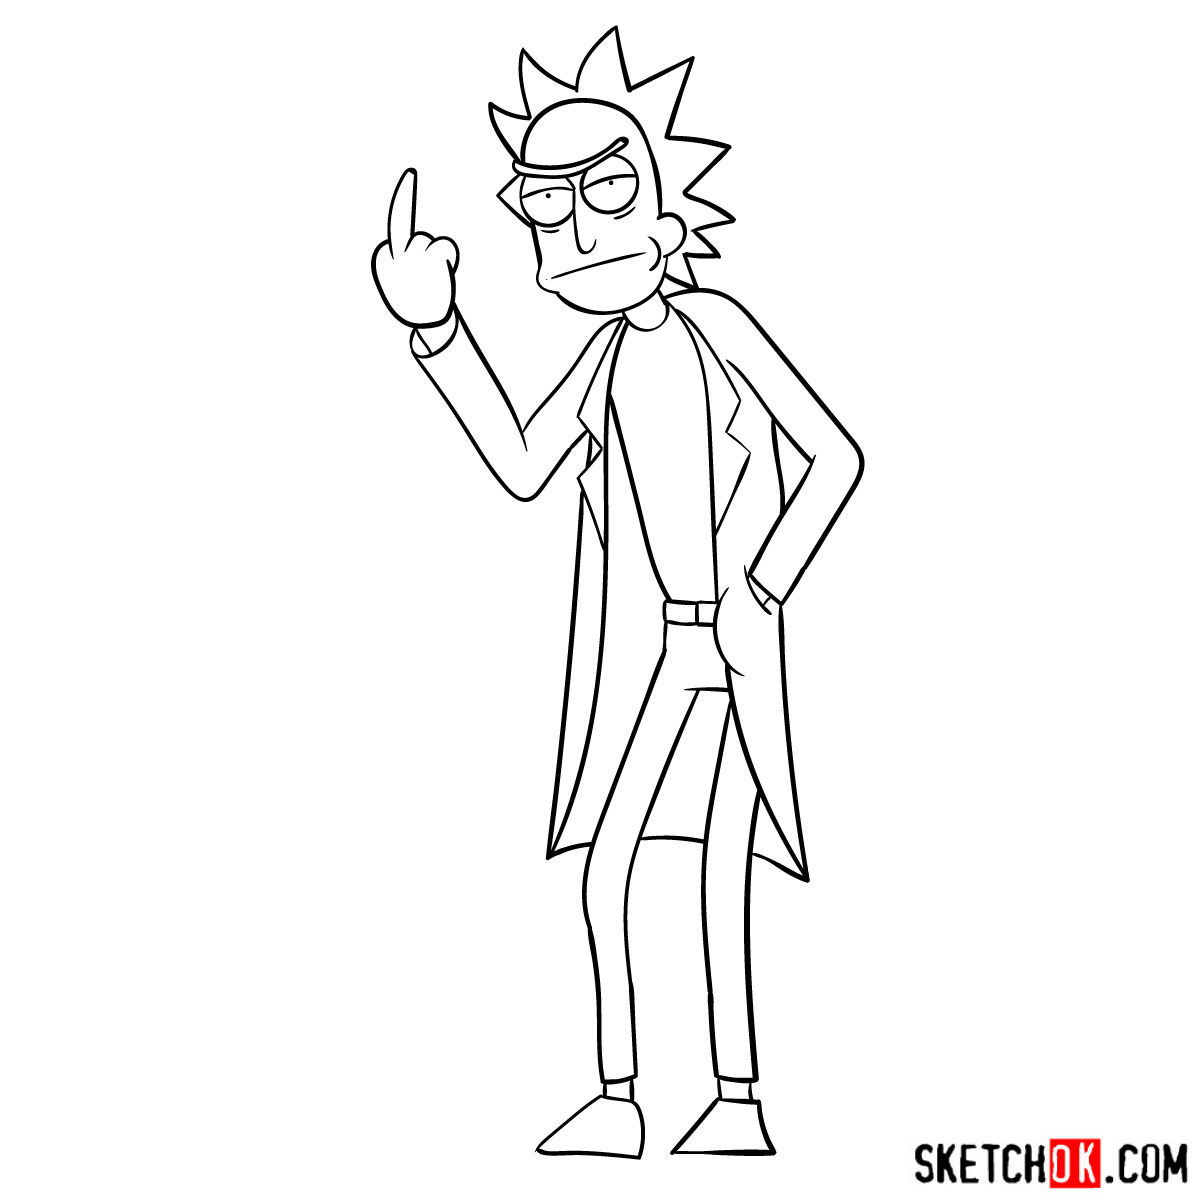 How to draw Rick showing his middle finger Step by step